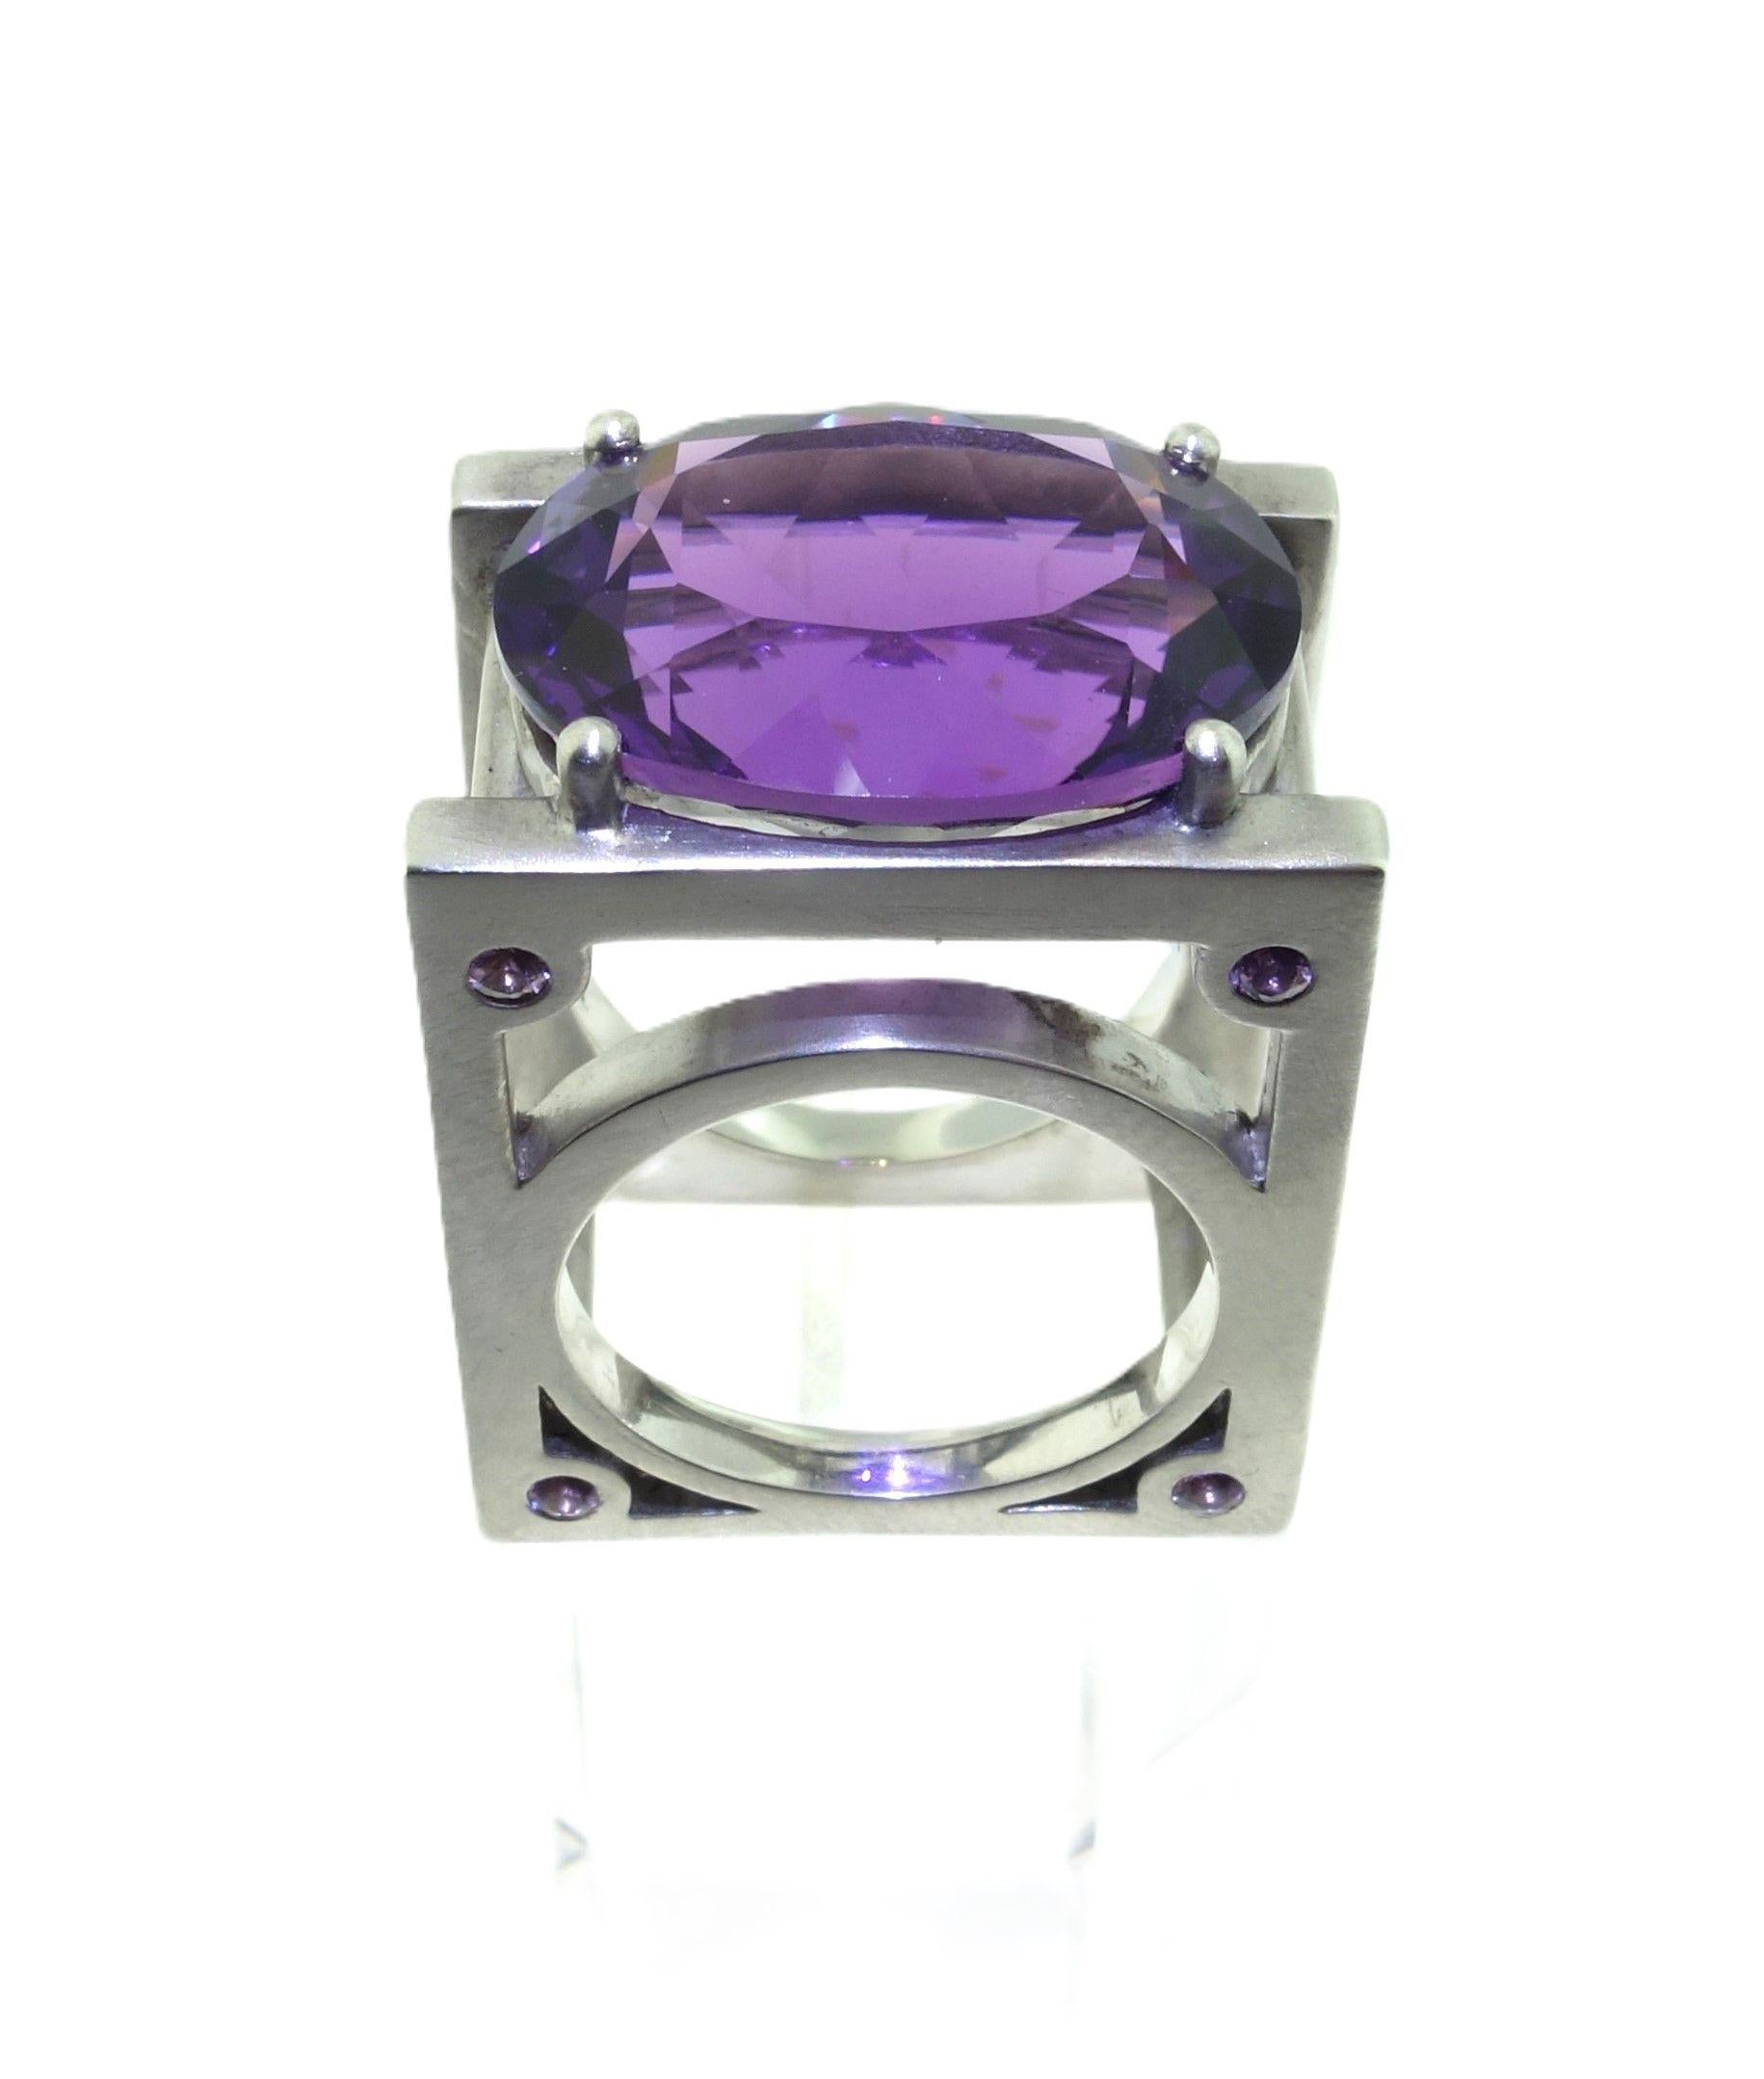 Simply Beautiful! Fabulous Architectural Solitaire Amethyst Cocktail Ring. Featuring a Hand set 18.22 Carat Oval Amethyst, measuring approx. 20mm x 15mm. Each corner enhanced with a Hand set Round 2mm Lavender Sapphire. The 4 Lavender Sapphires,